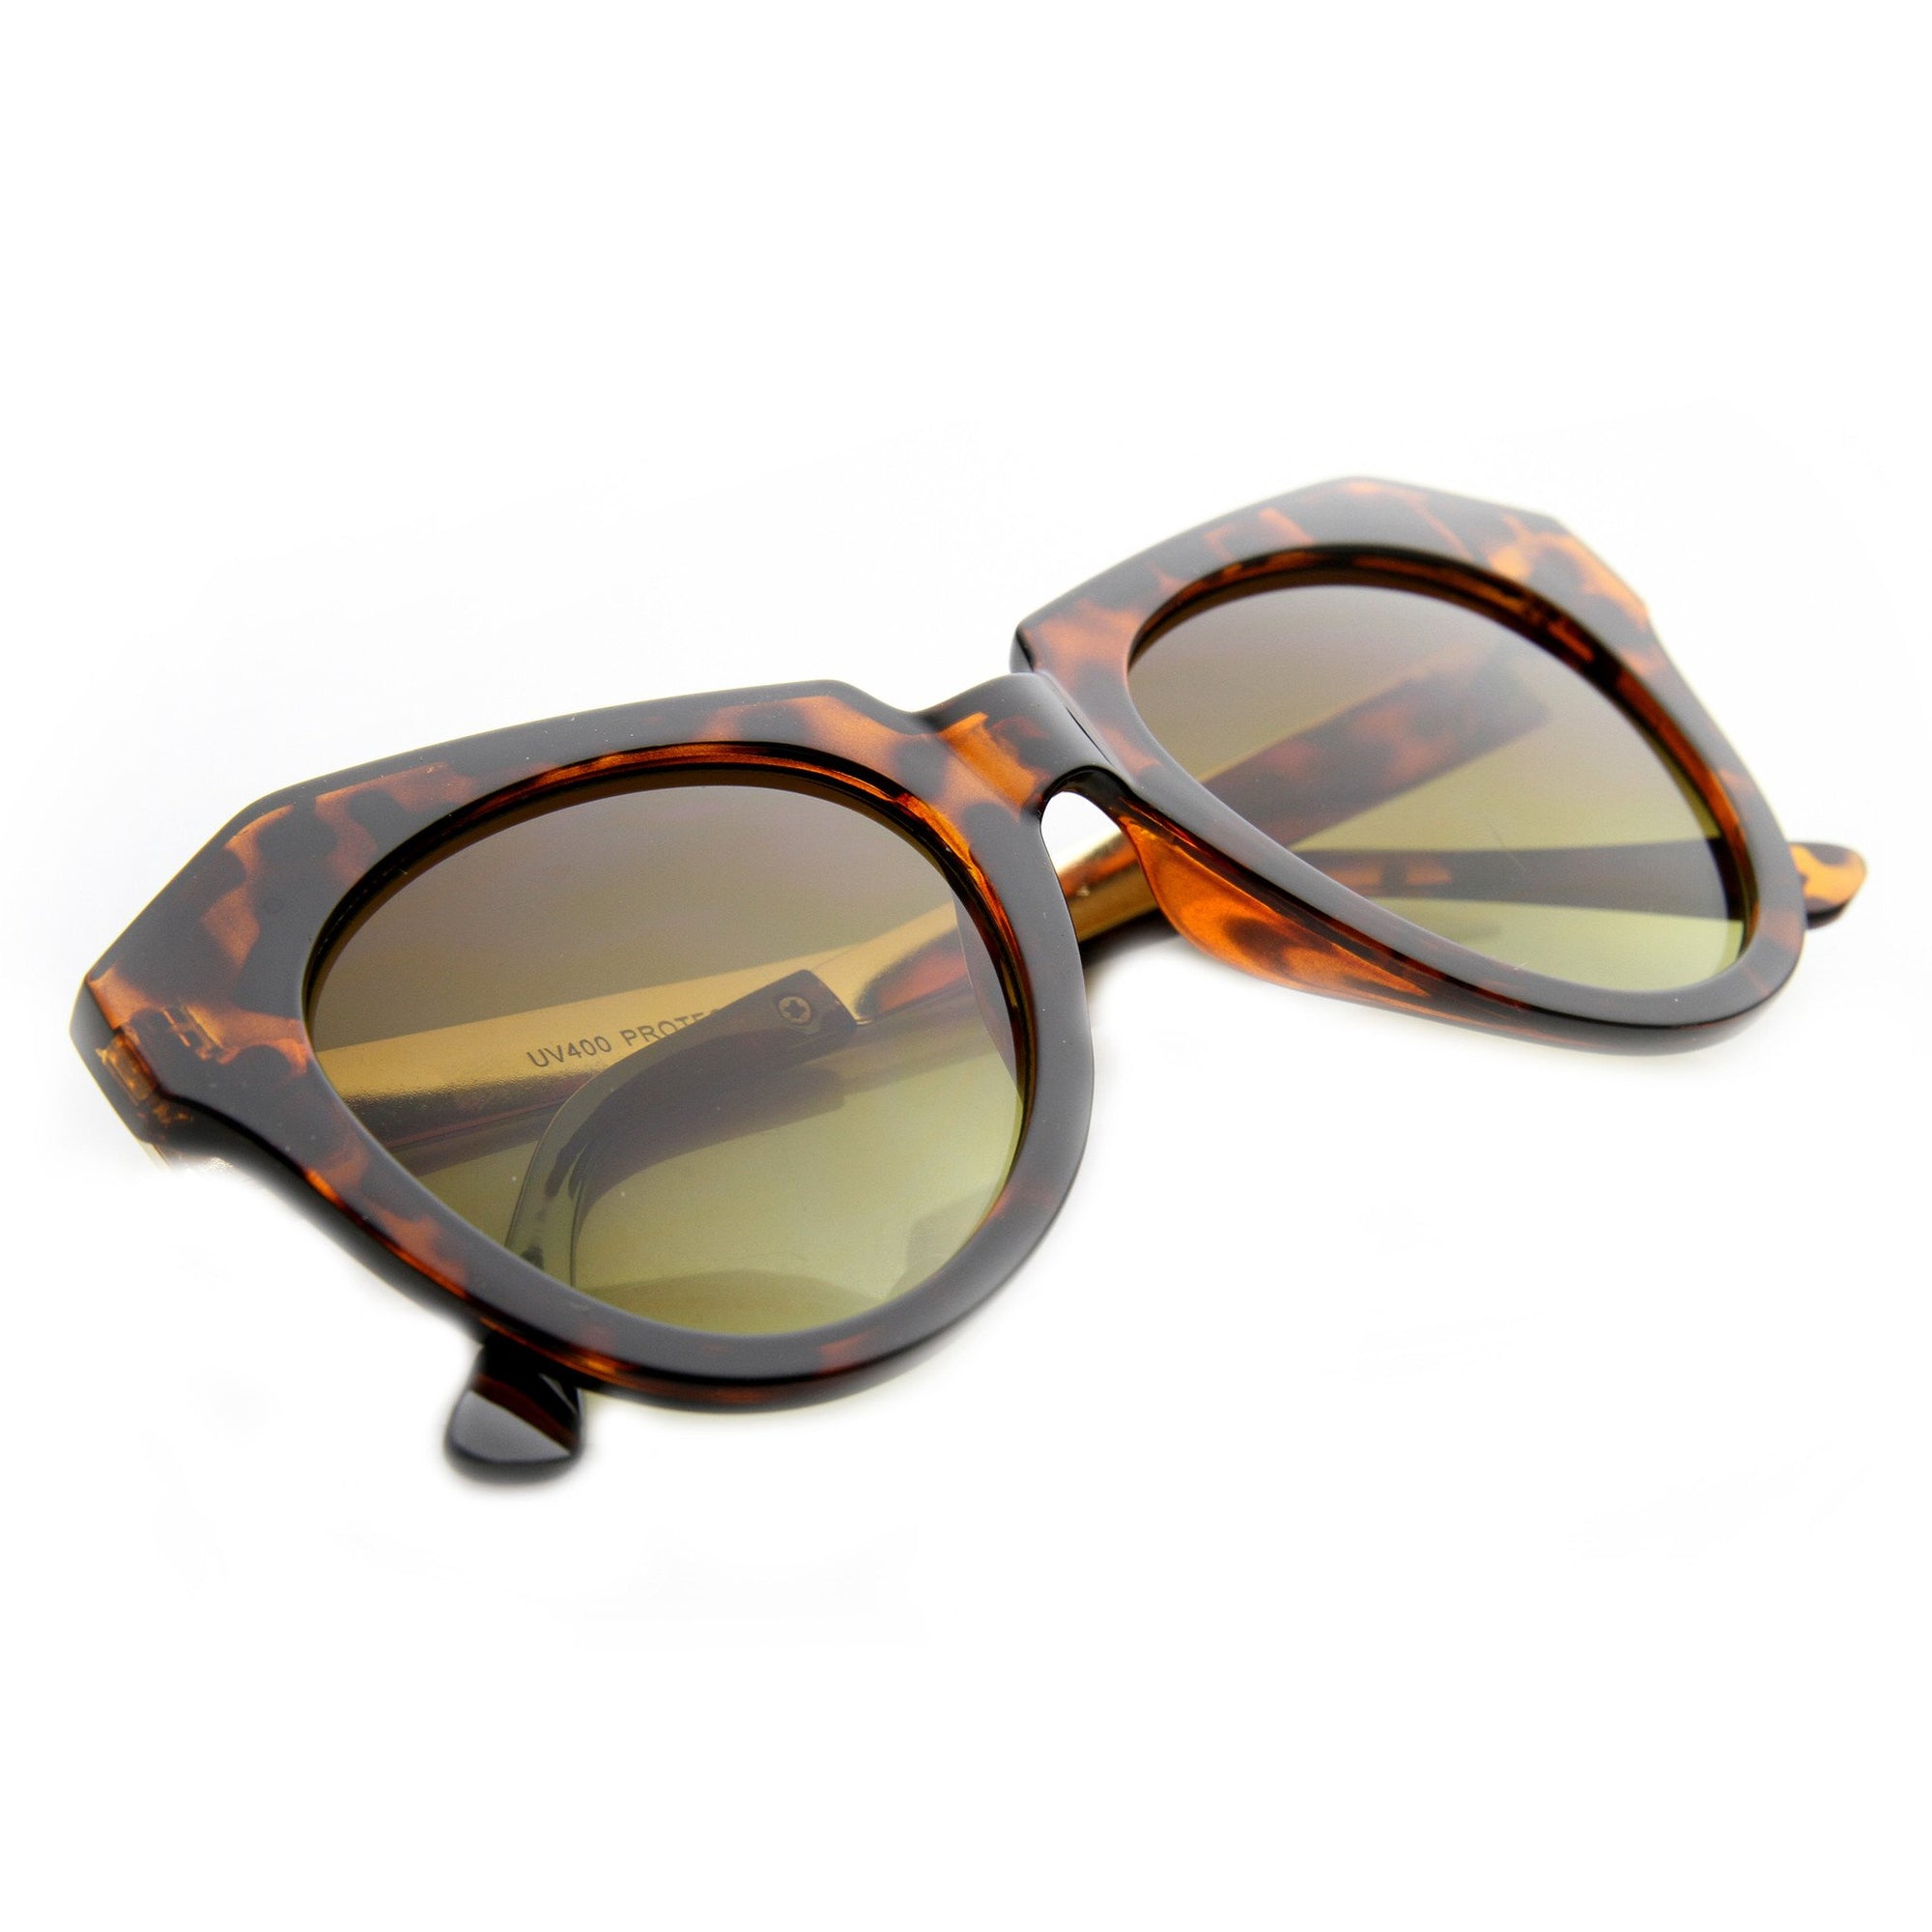 Women's Oversize Fashion Sunglasses With Metal Temples - zeroUV